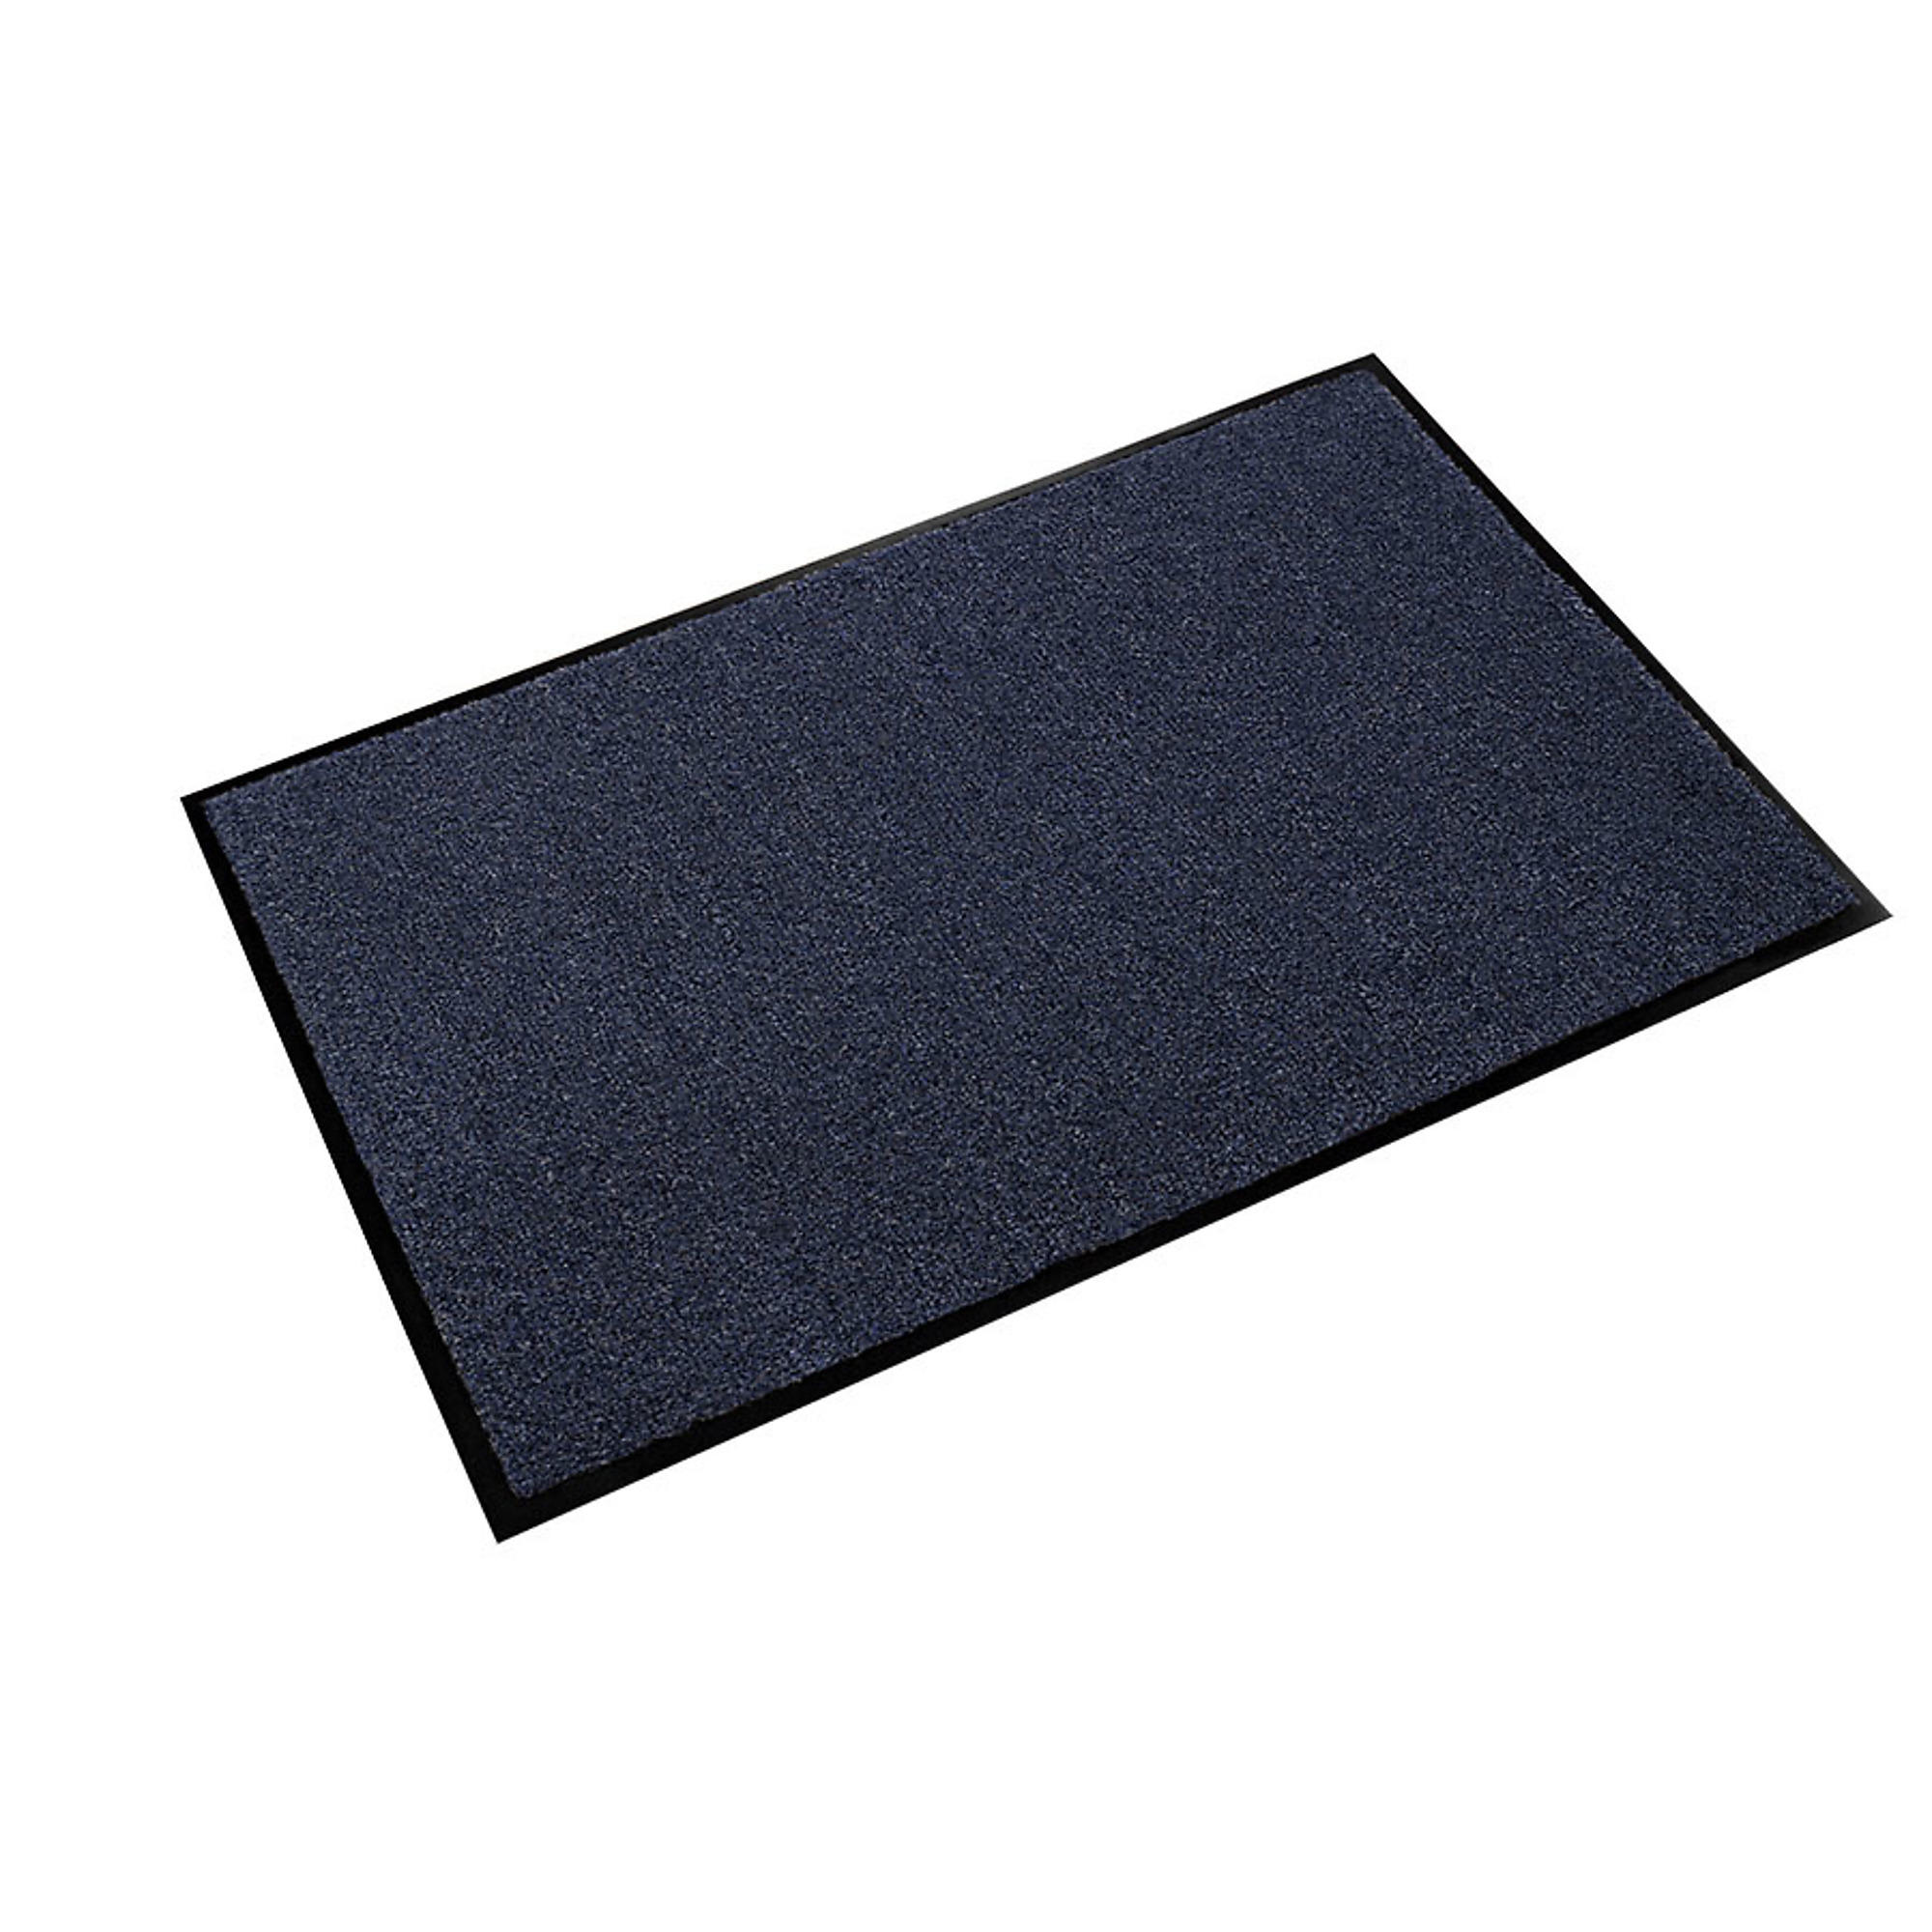 Crown Matting Technologies, Rely-On Olefin 3ft.x5ft. Navy Blue, Width 36 in, Length 60 in, Thickness 3/8 in, Model GS 0035NB